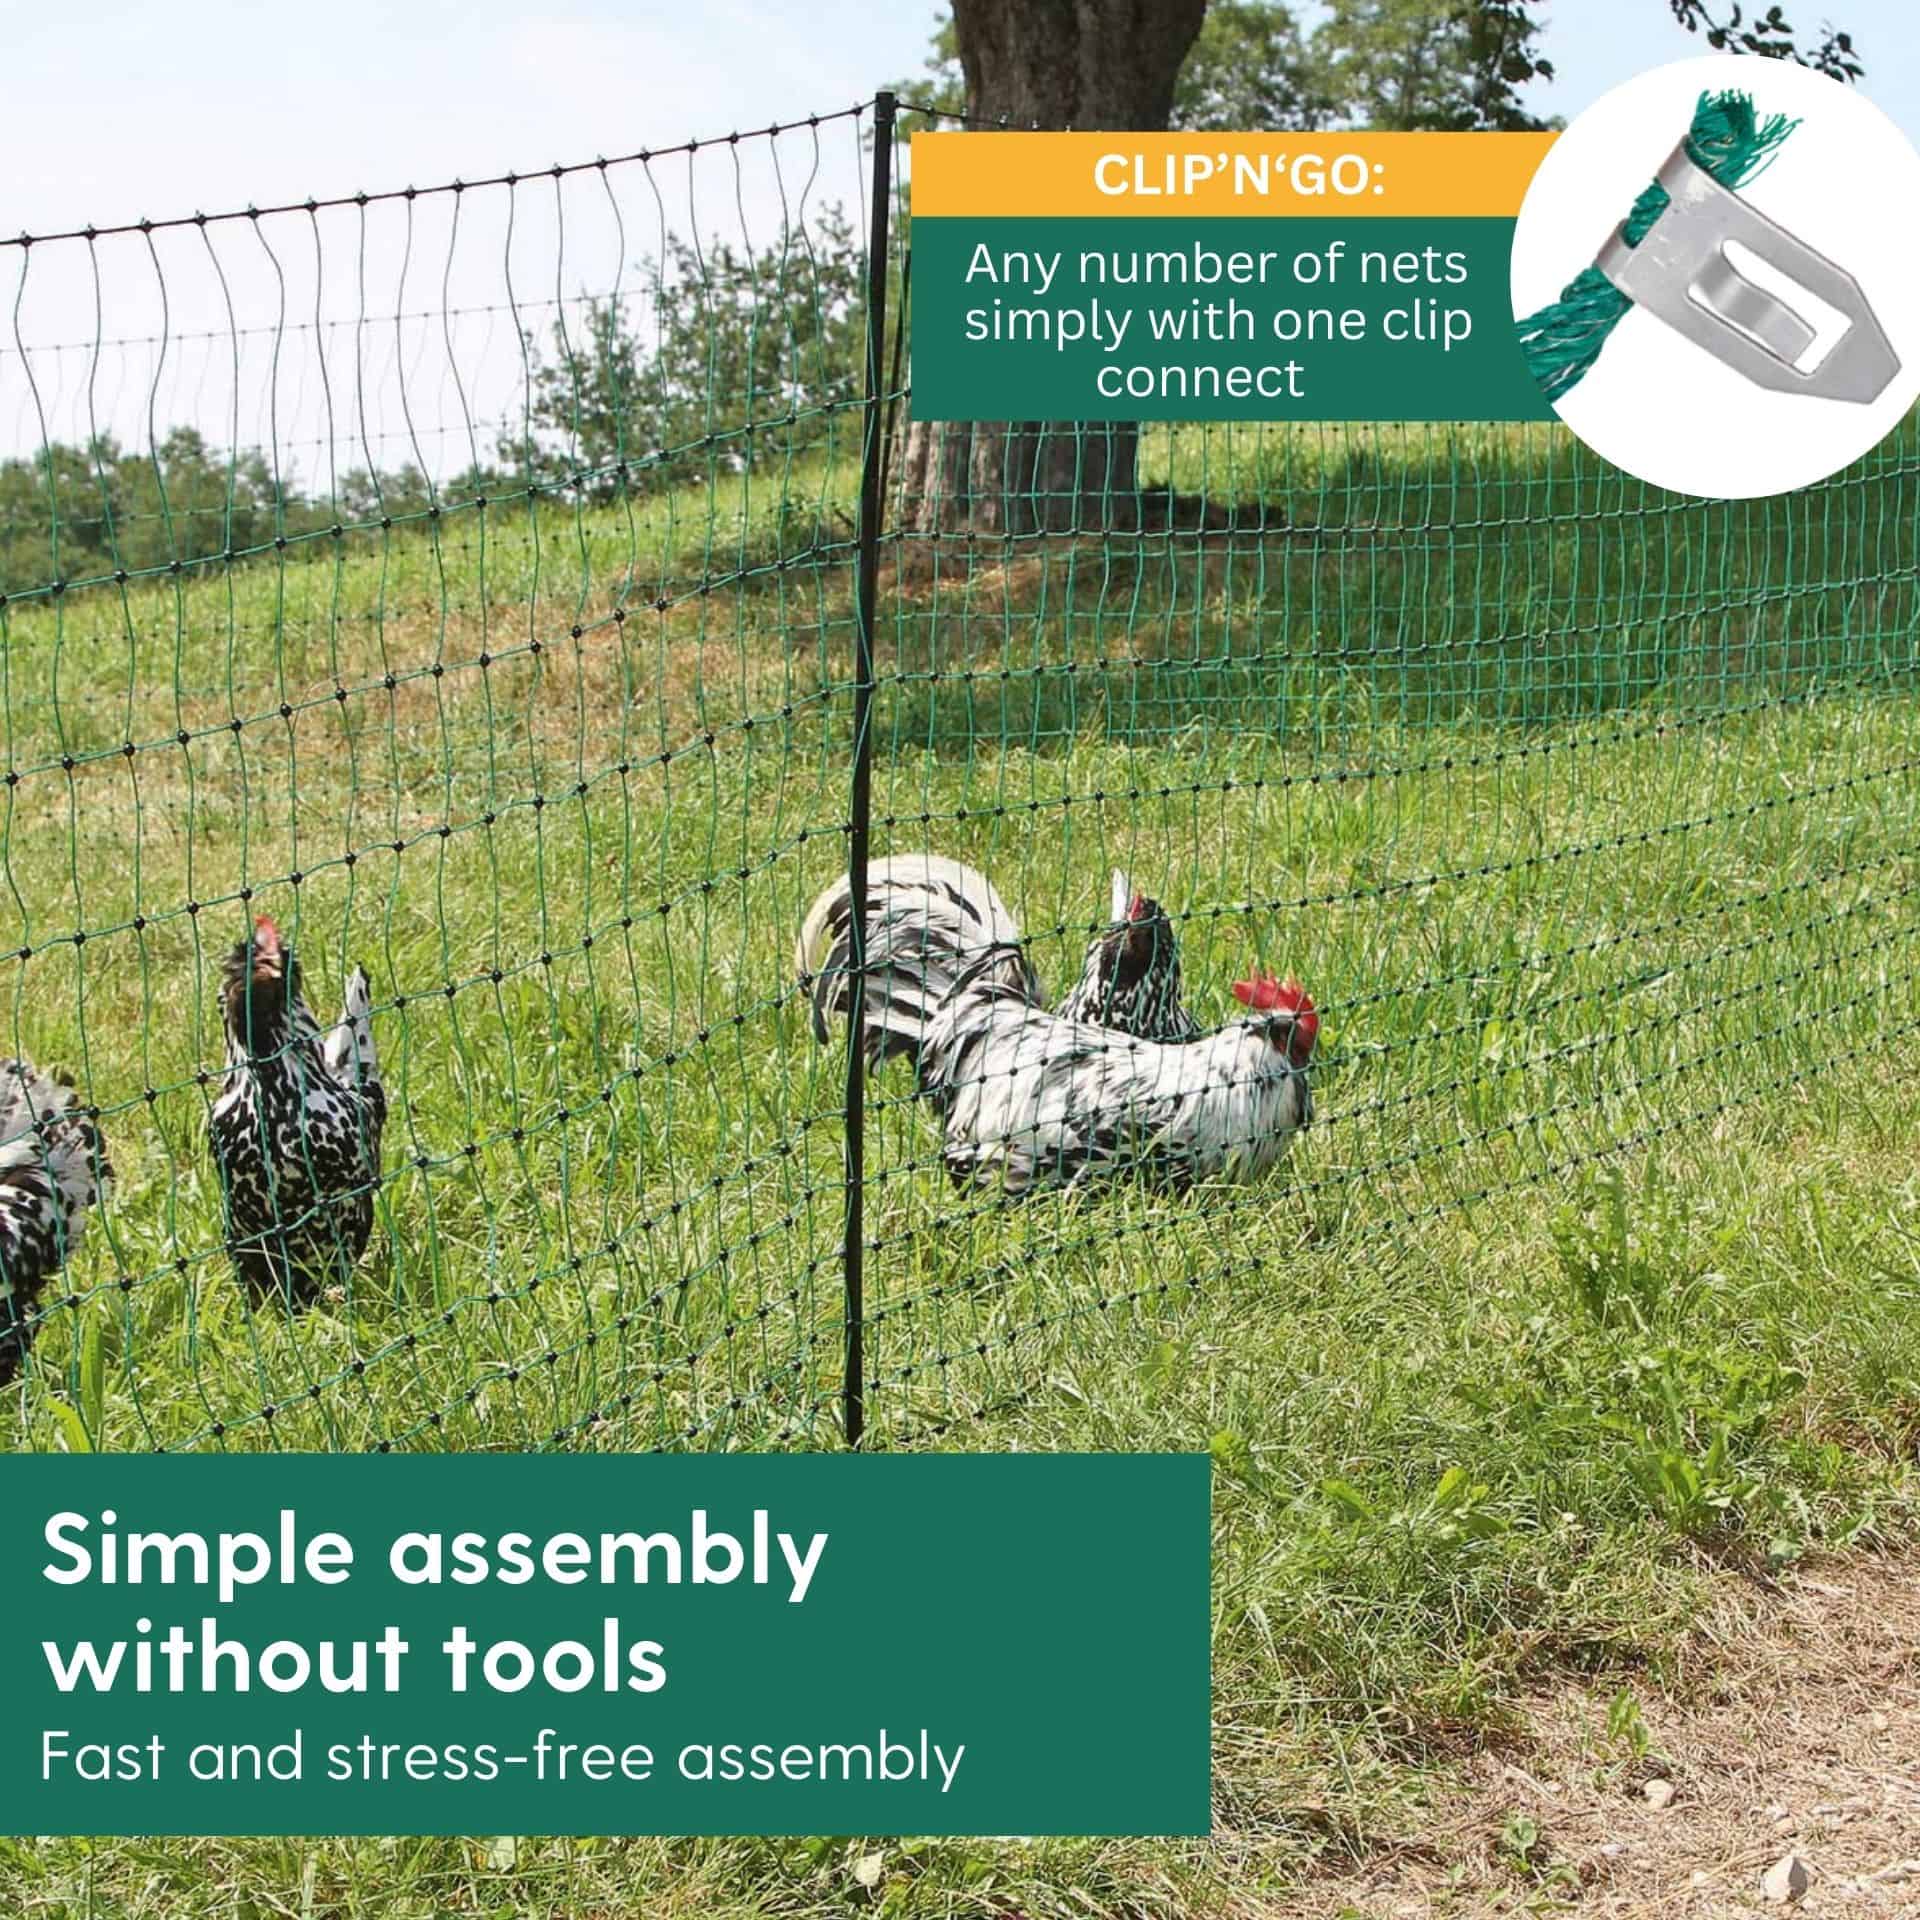 Agrarzone Poultry Net Classic electrificable, double tip, green 50 m x 112 cm